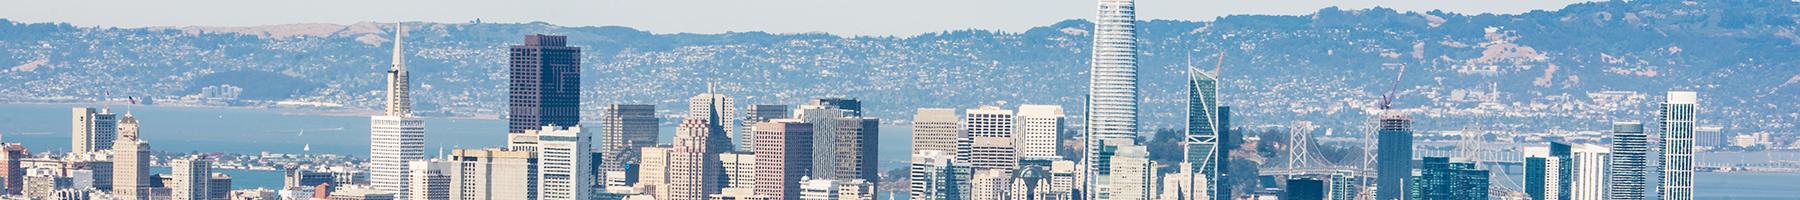 Image of a wide panoramic image of the City of San Francisco as seen from Twin Peaks towards downtown.